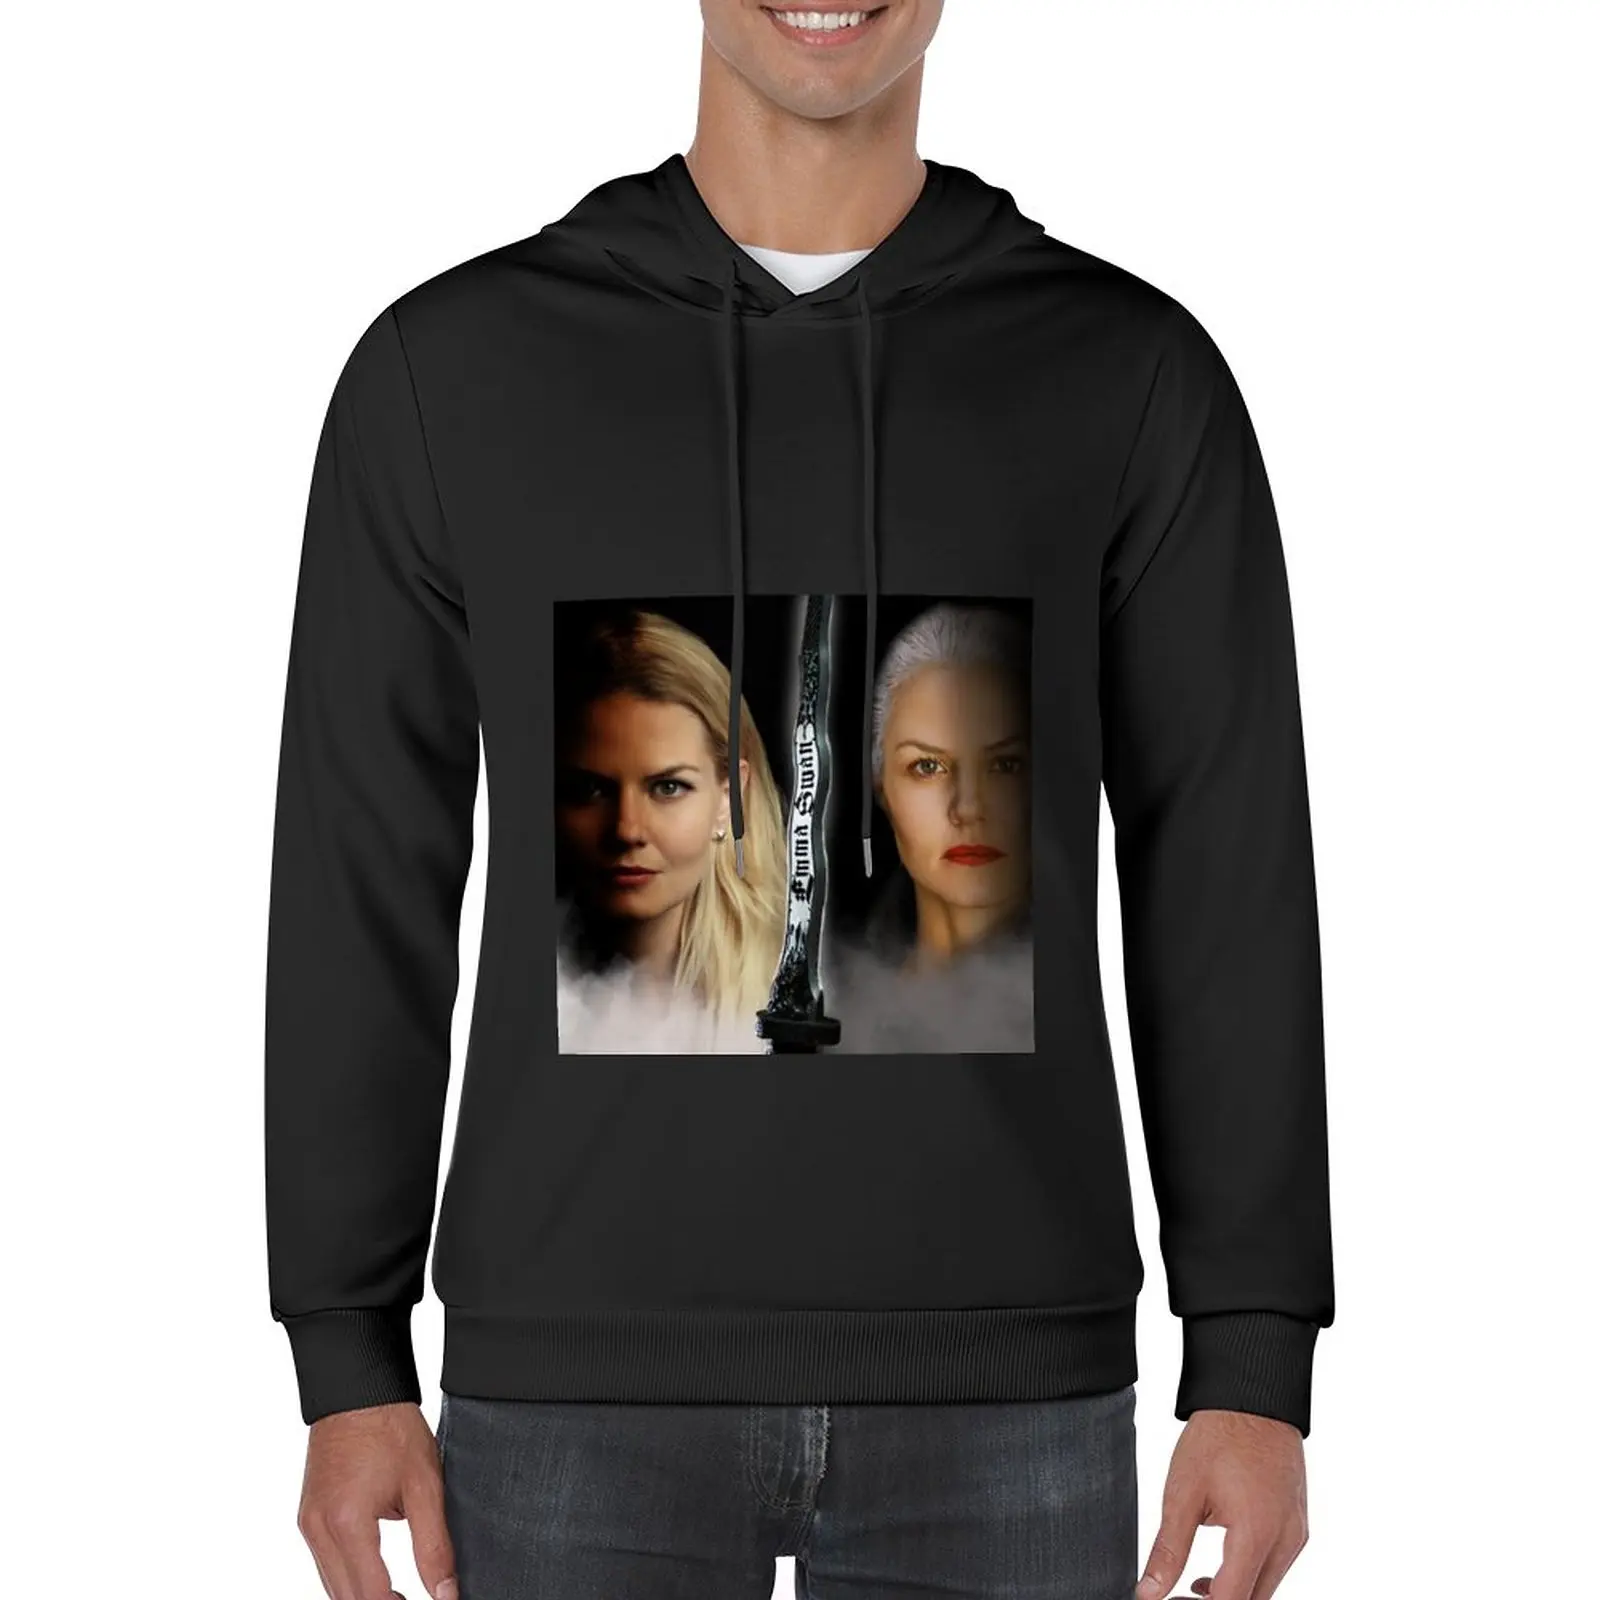 

New Once Upon A Time - Emma Swan Hoodie men's clothes autumn clothes anime clothing men's coat new hoodies and sweatshirts